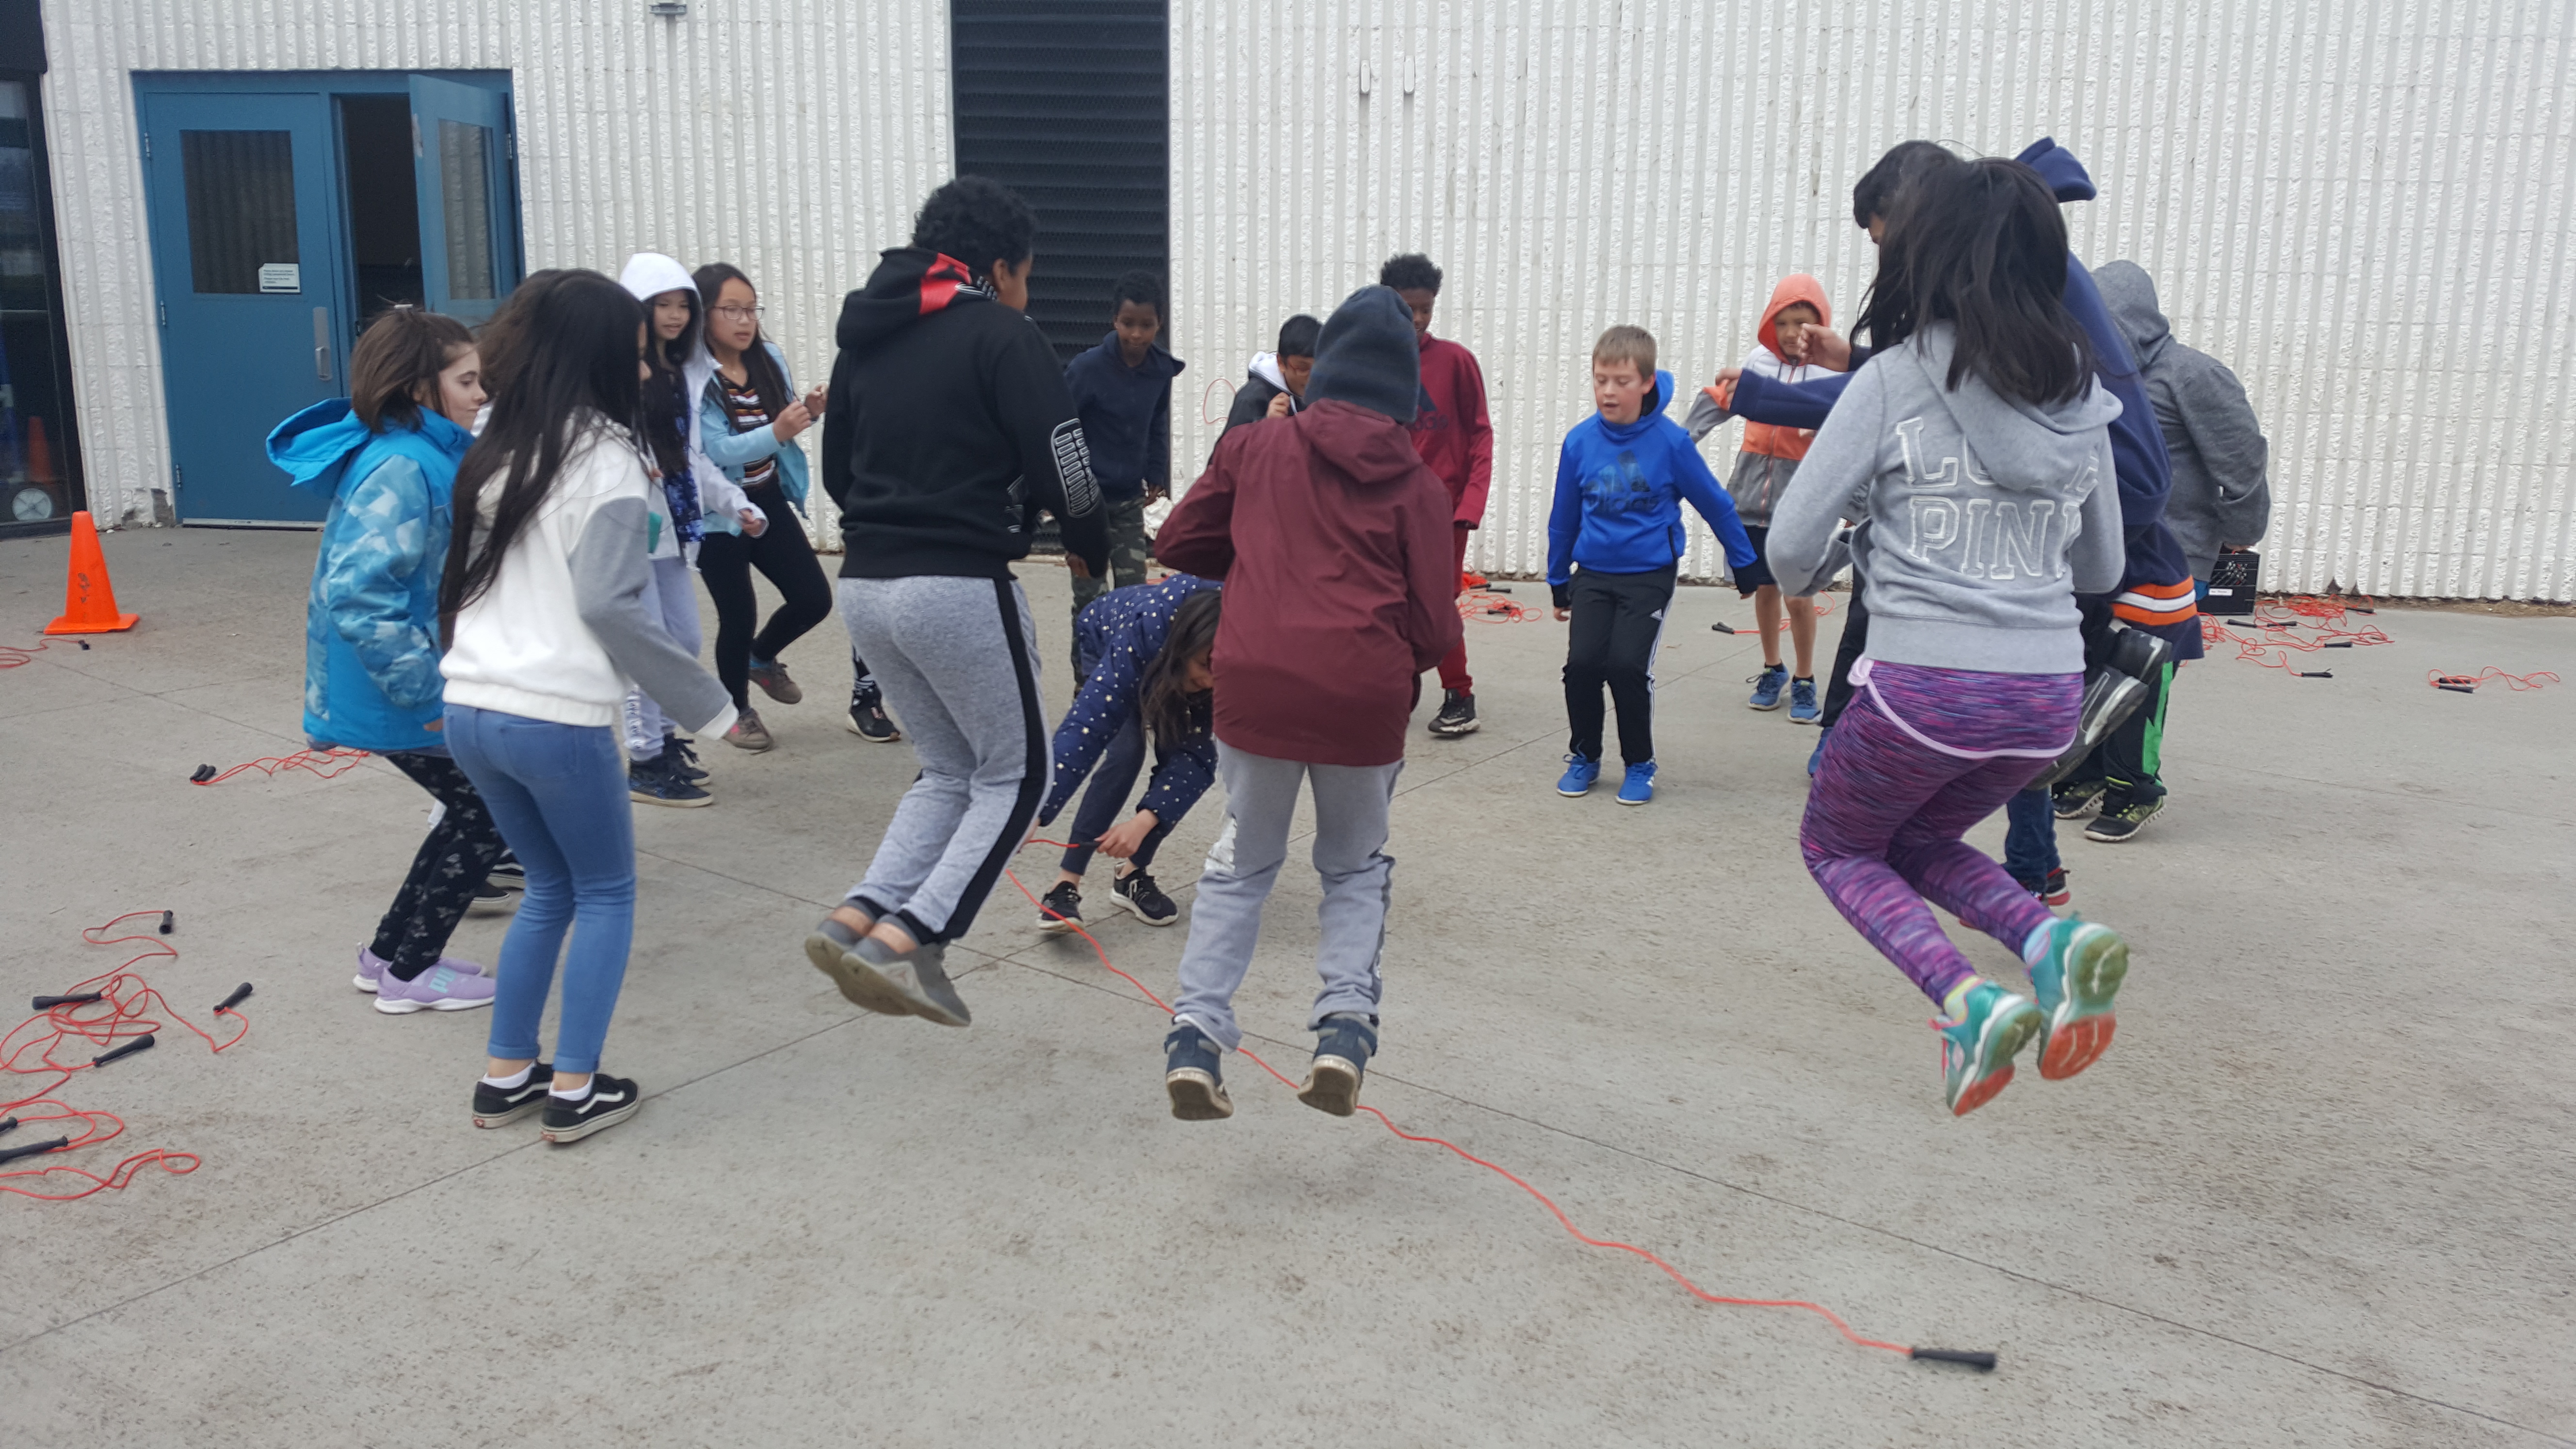 Jump Rope For Heart-Students learn to protect their heart and brain health, the importance of helping others and get active by skipping rope while raising funds for Heart & Stroke!